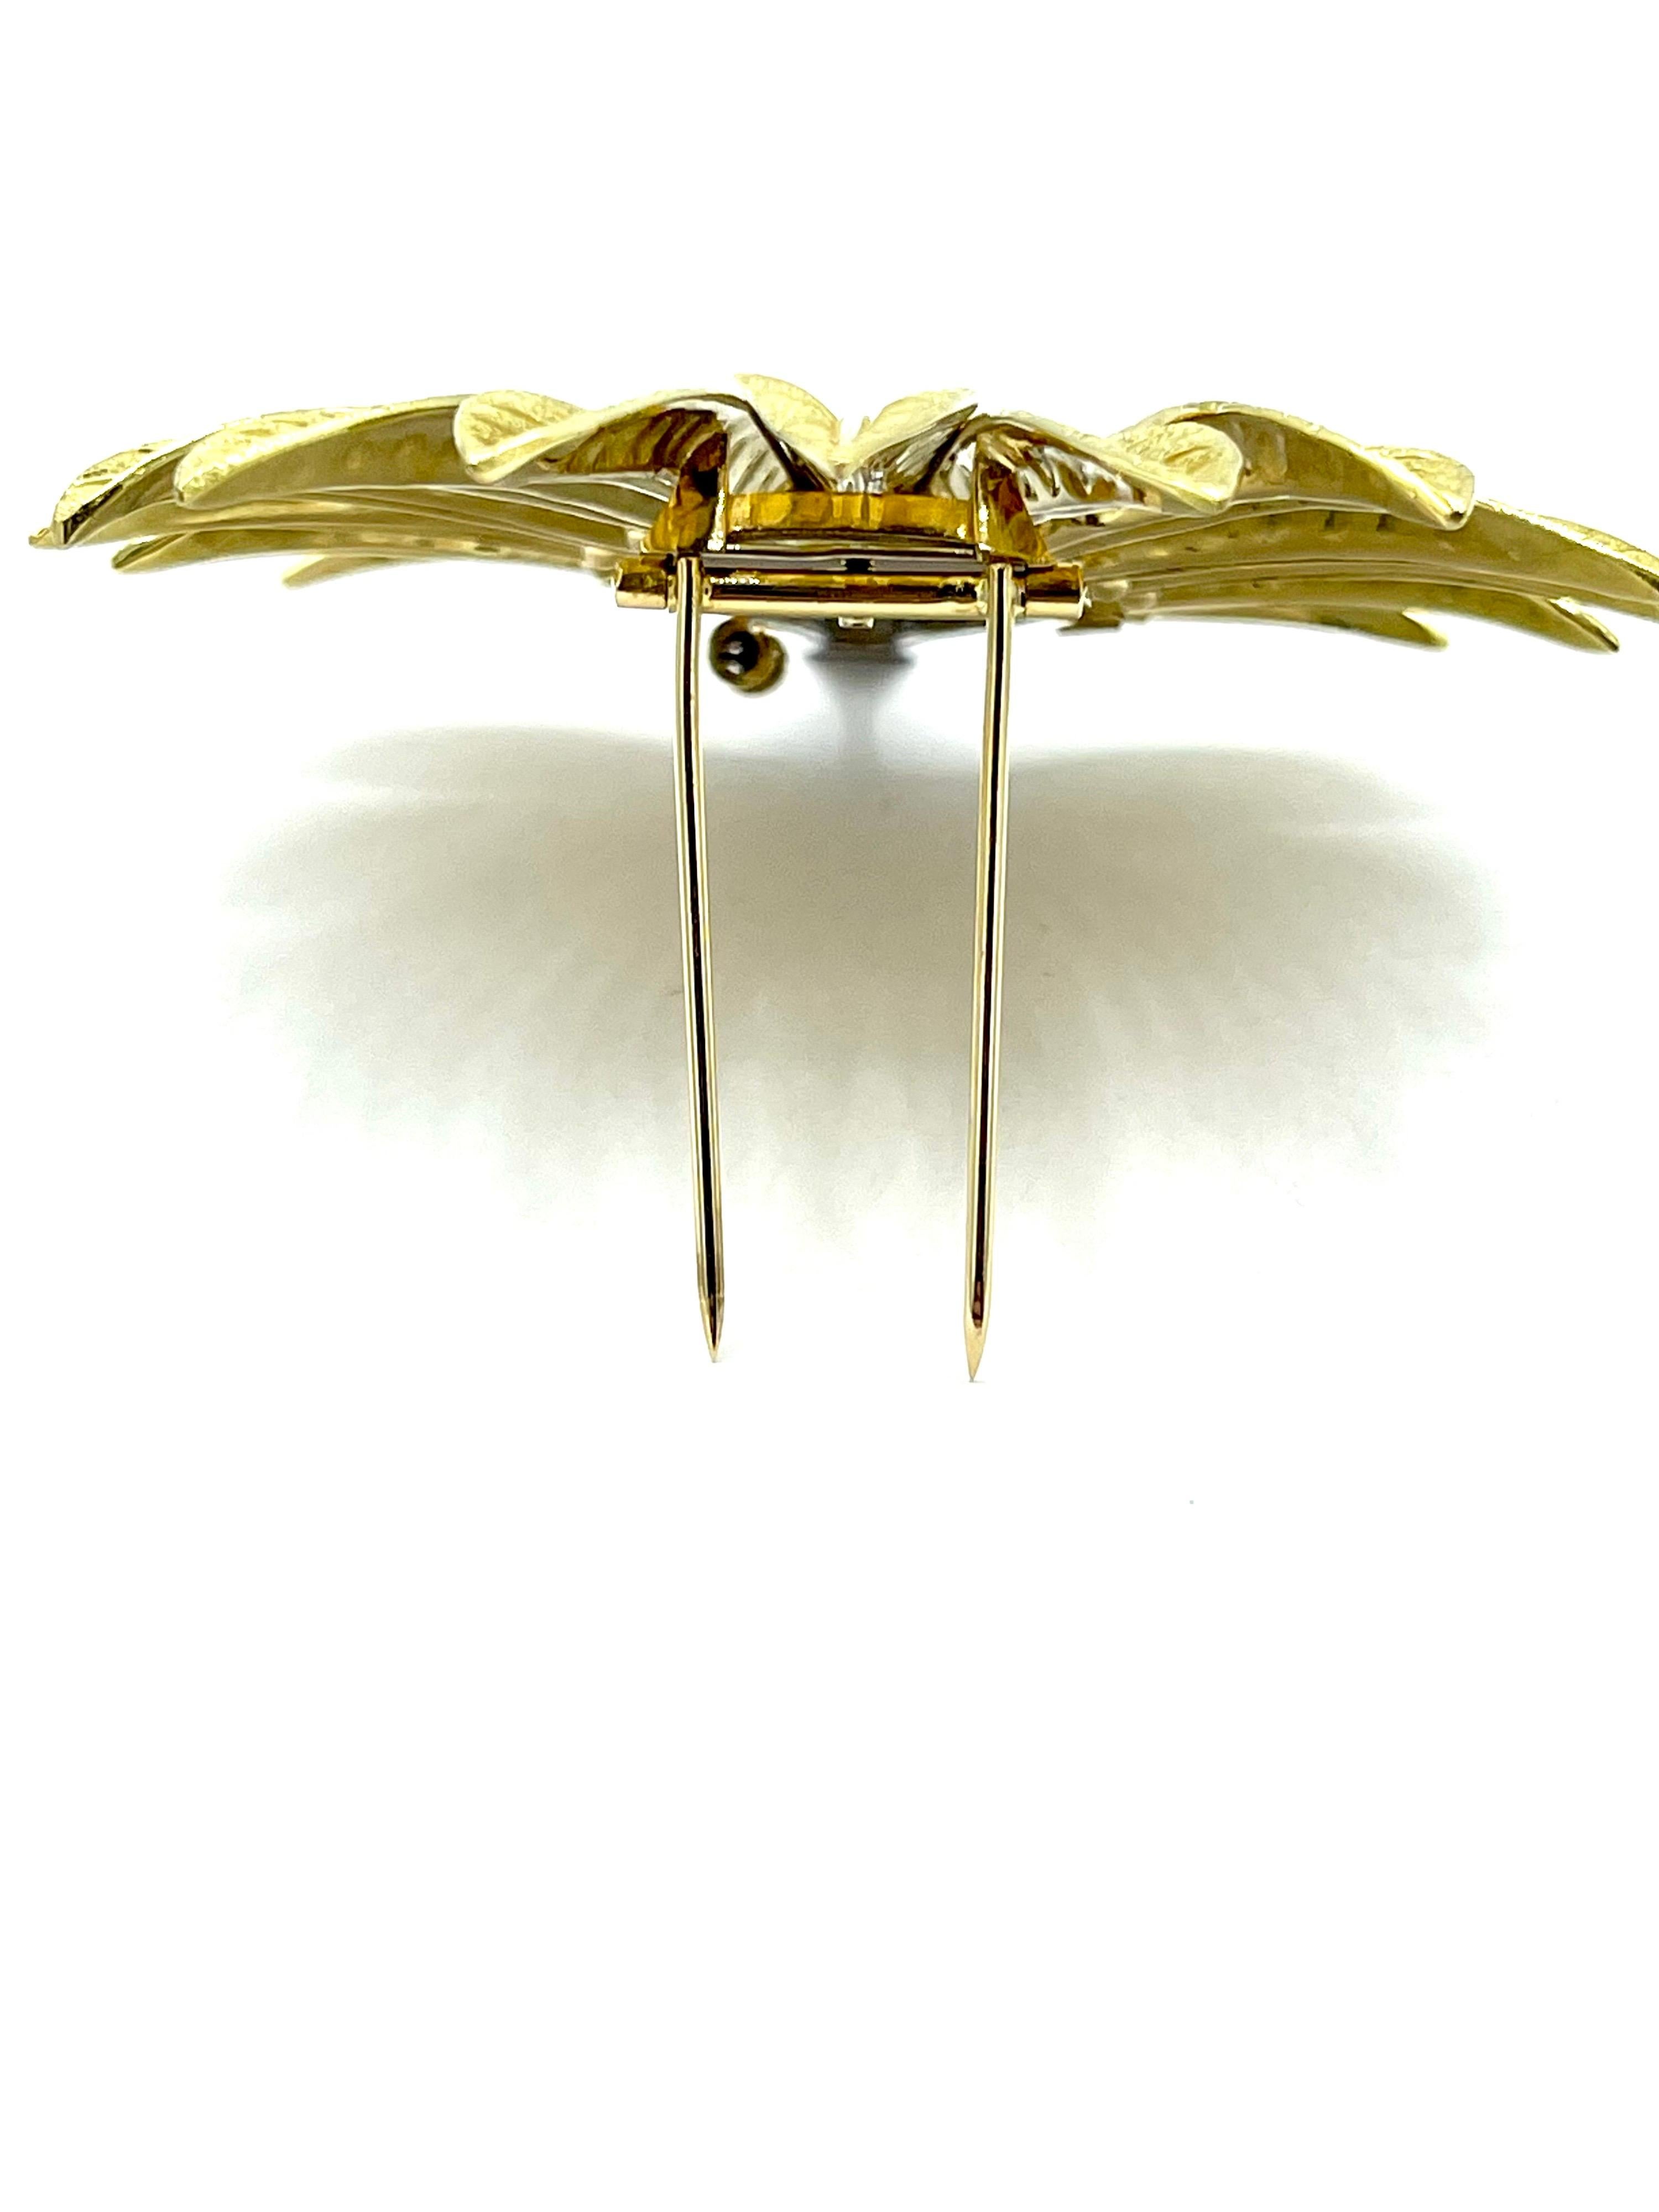 0.90 Carat Round Brilliant Diamond and 18K Gold & Platinum Feathered Fan Brooch In Excellent Condition For Sale In Chevy Chase, MD